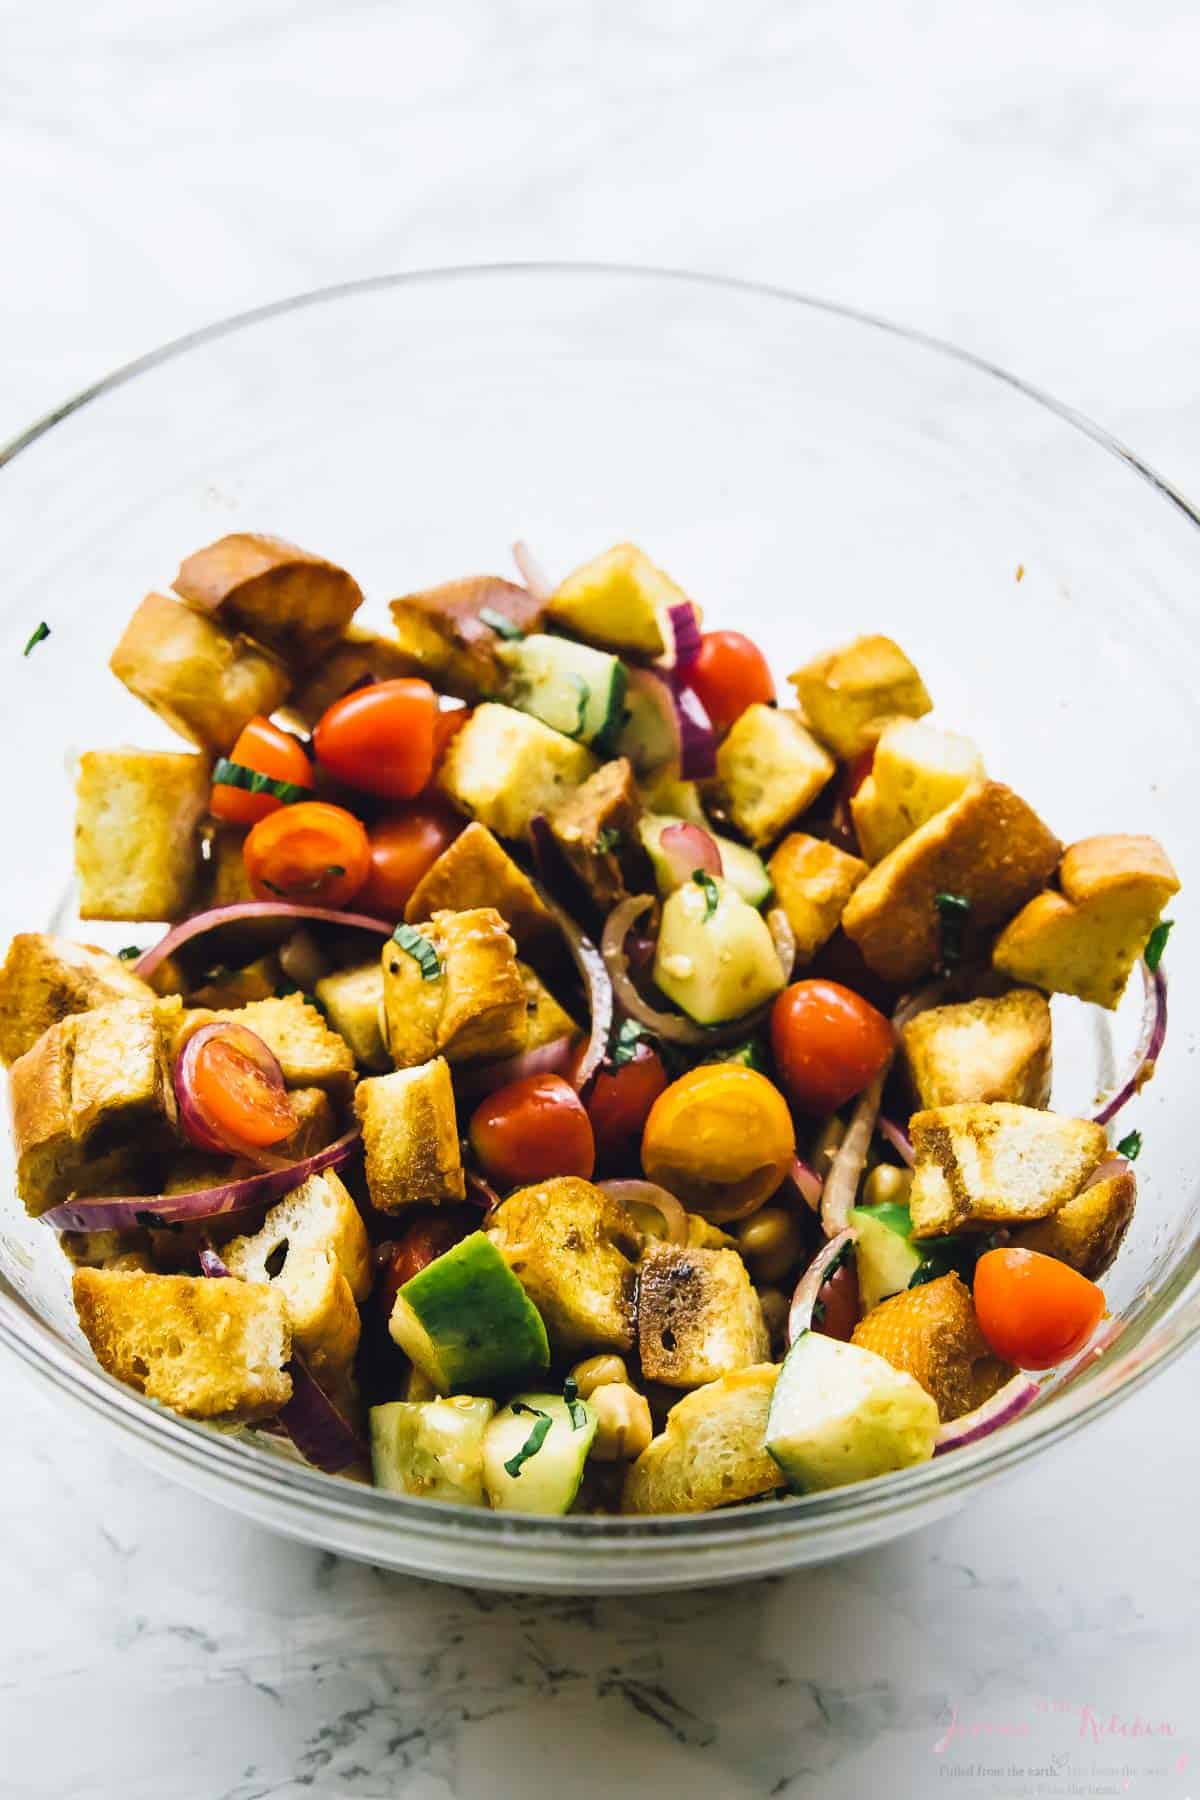 Cubed bread and diced vegetables in a glass bowl. 